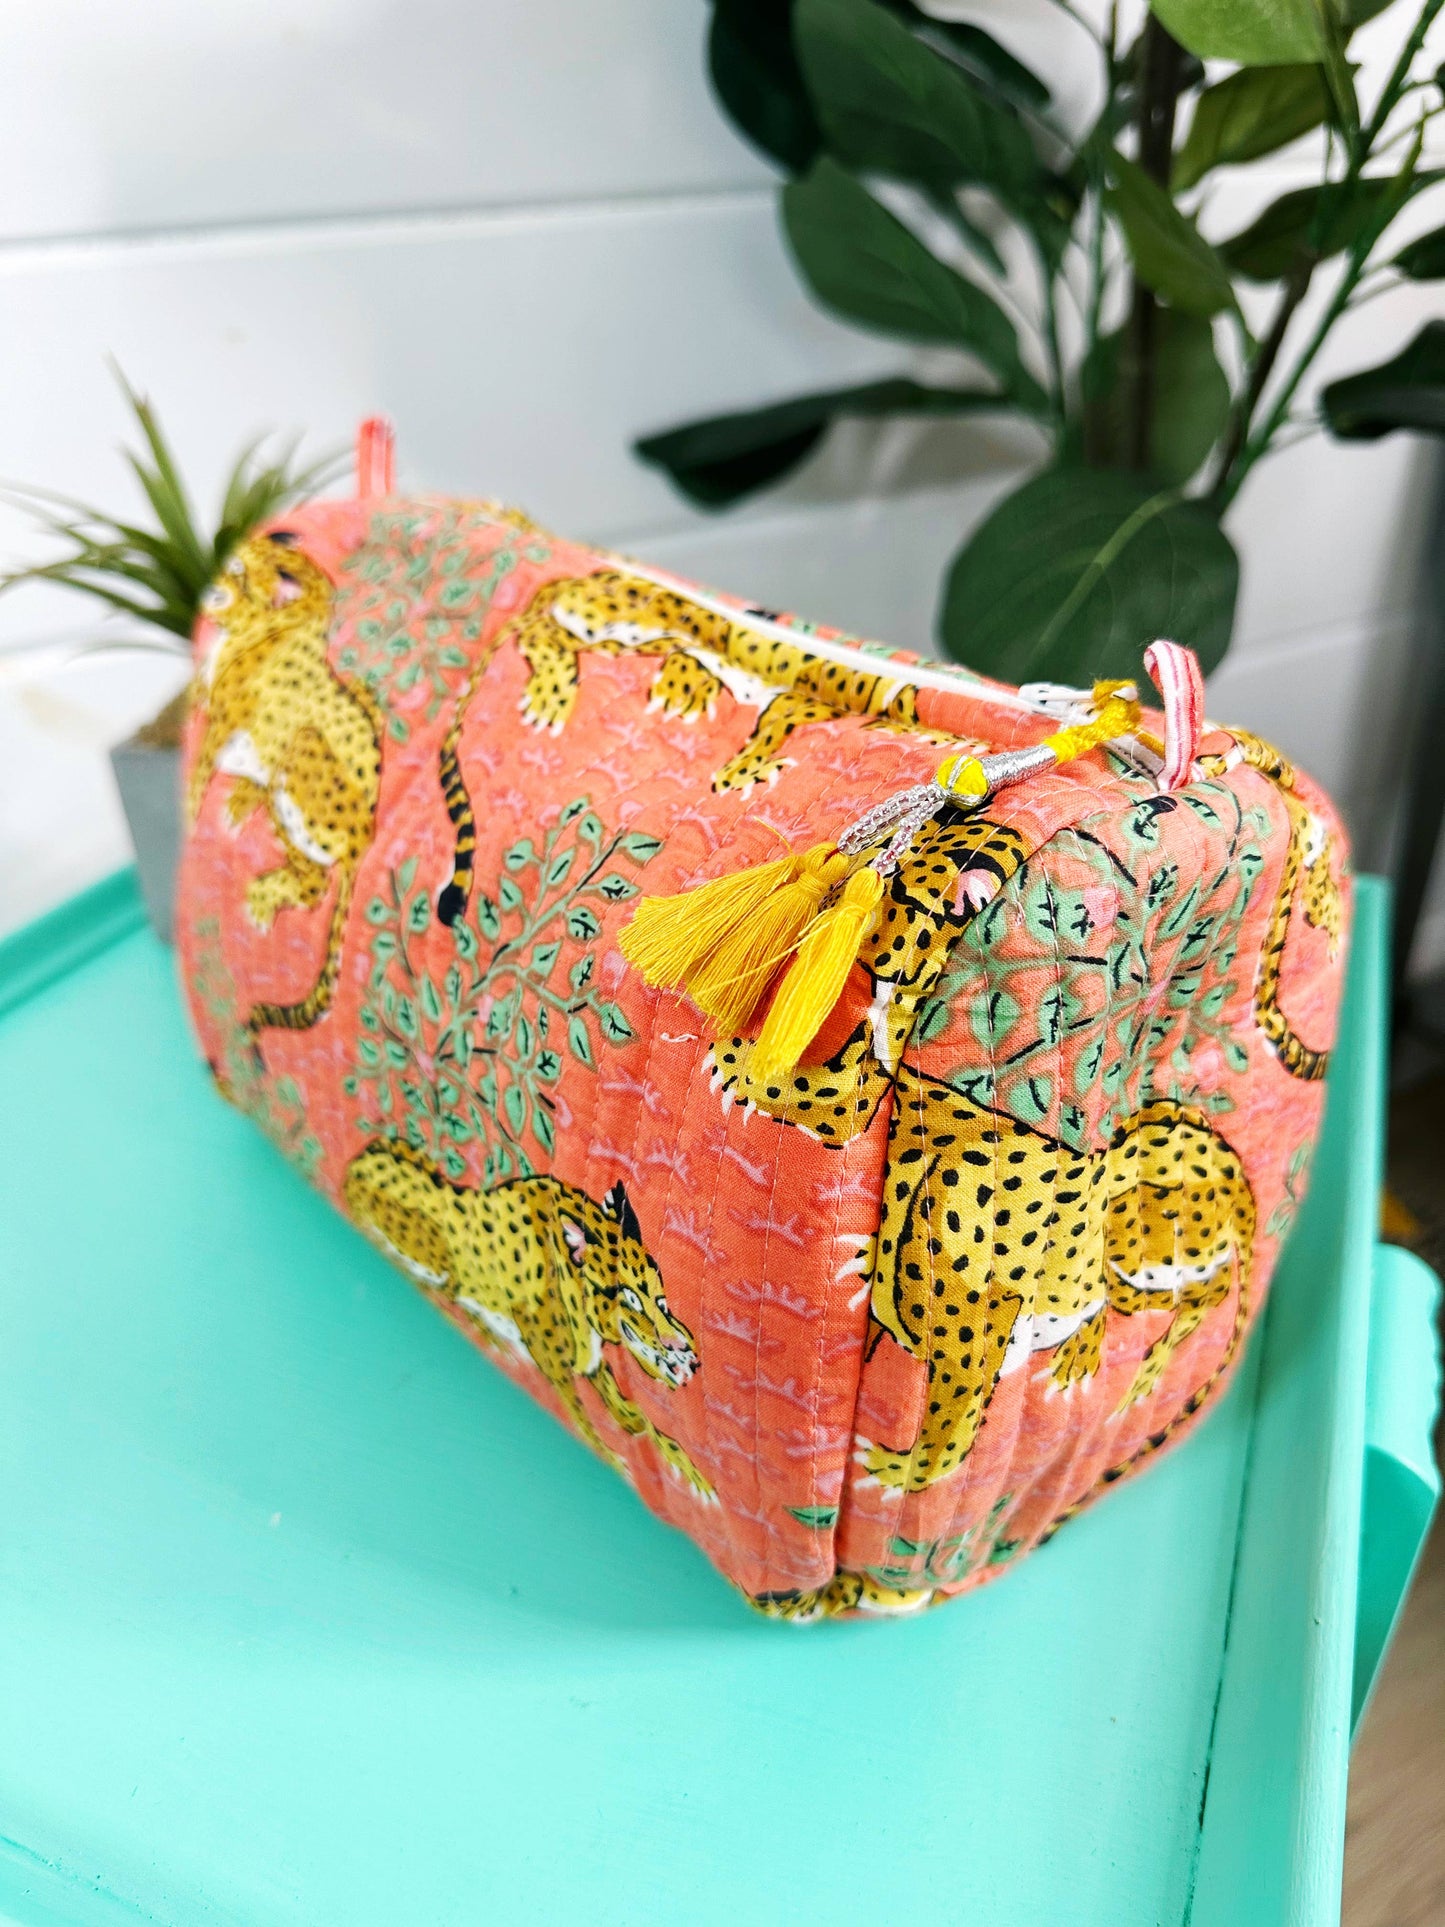 Coral Tigers Quilted Makeup Travel Cosmetics Toiletry Bag